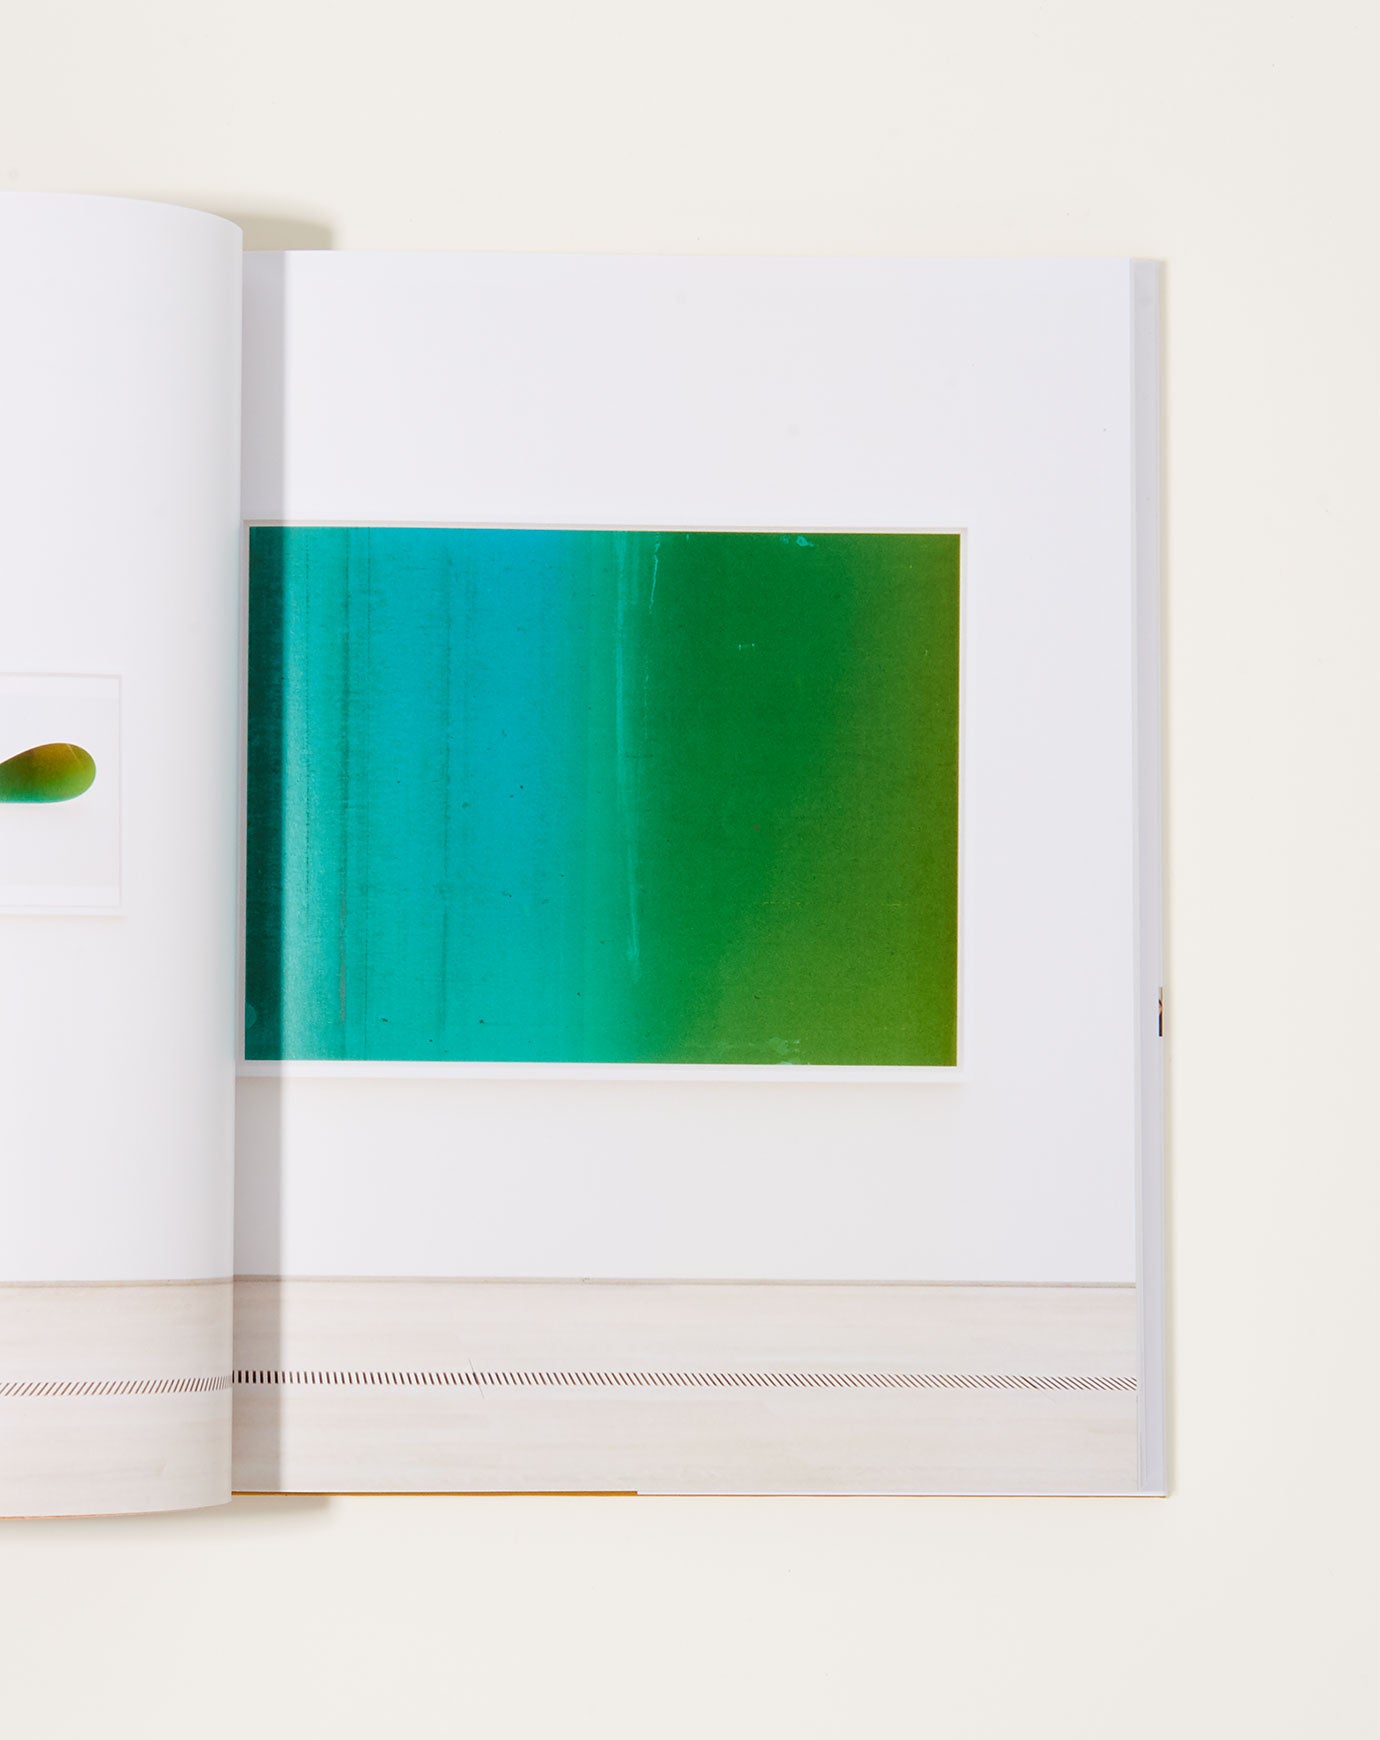 Wolfgang Tillmans: To look without fear